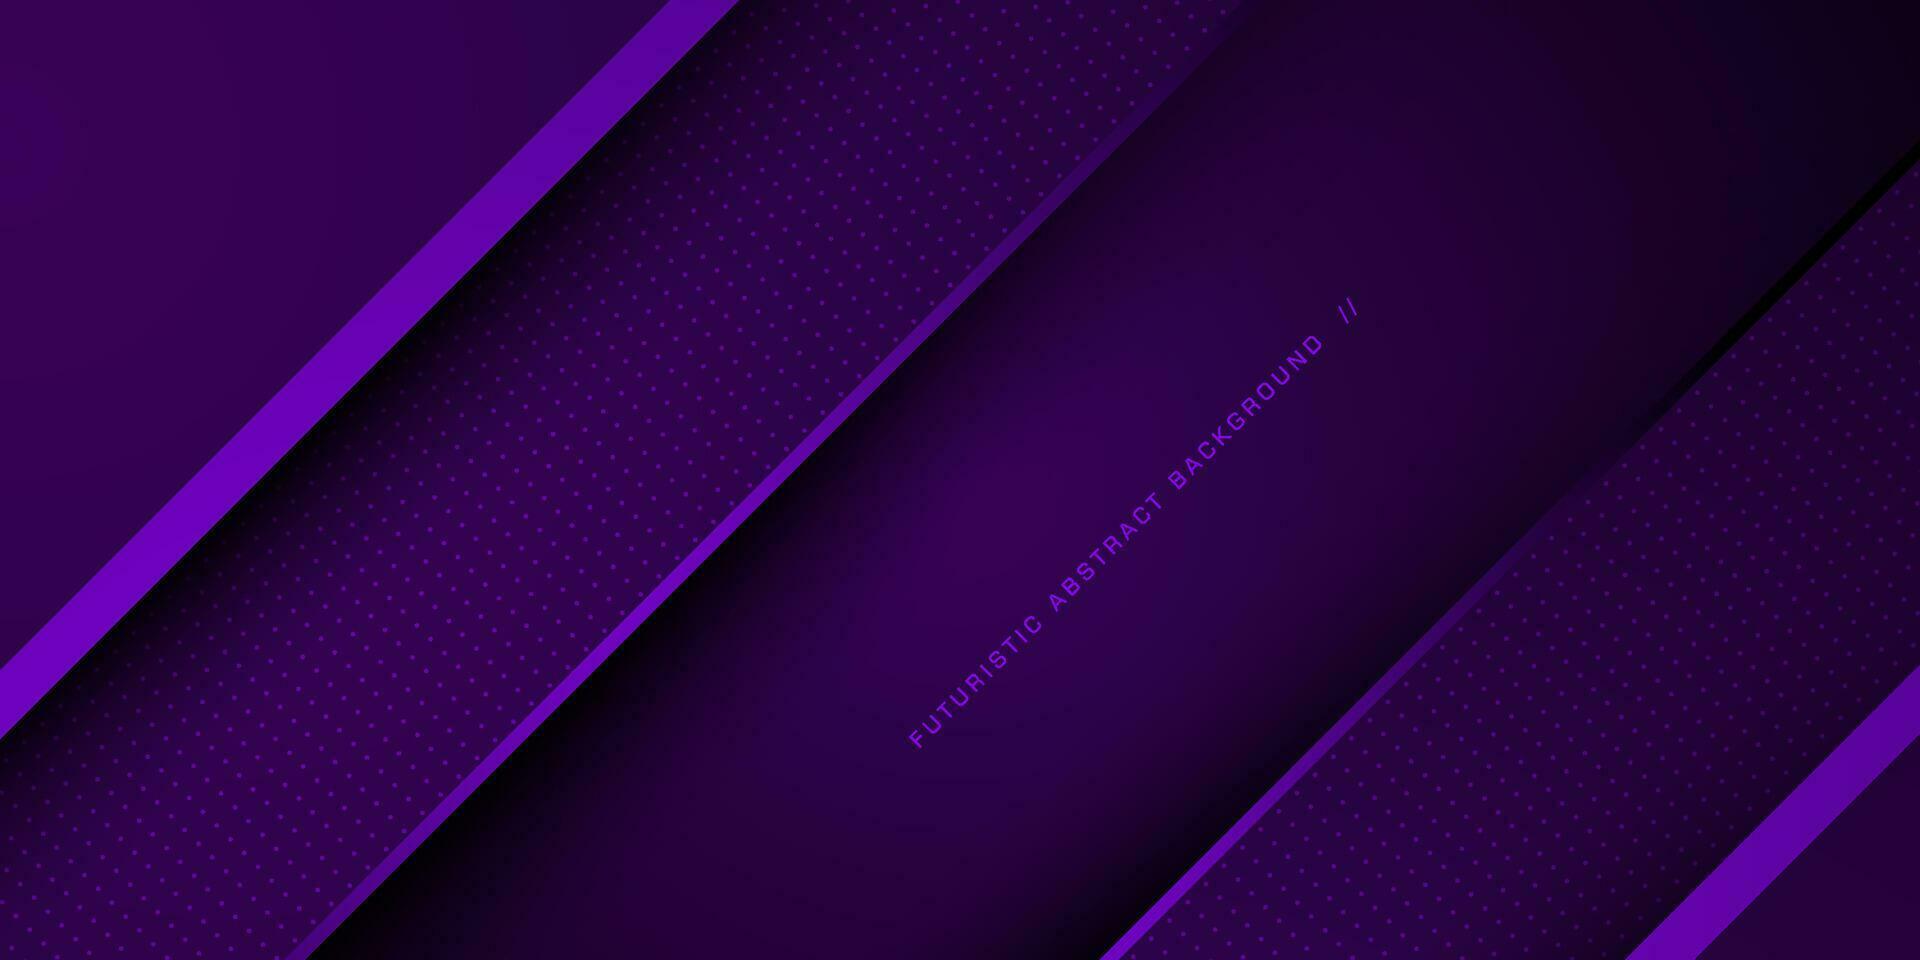 Abstract futuristic dark purple gradient illustration background with 3d look and simple overlap pattern. Modern cool design and luxury. Eps10 vector